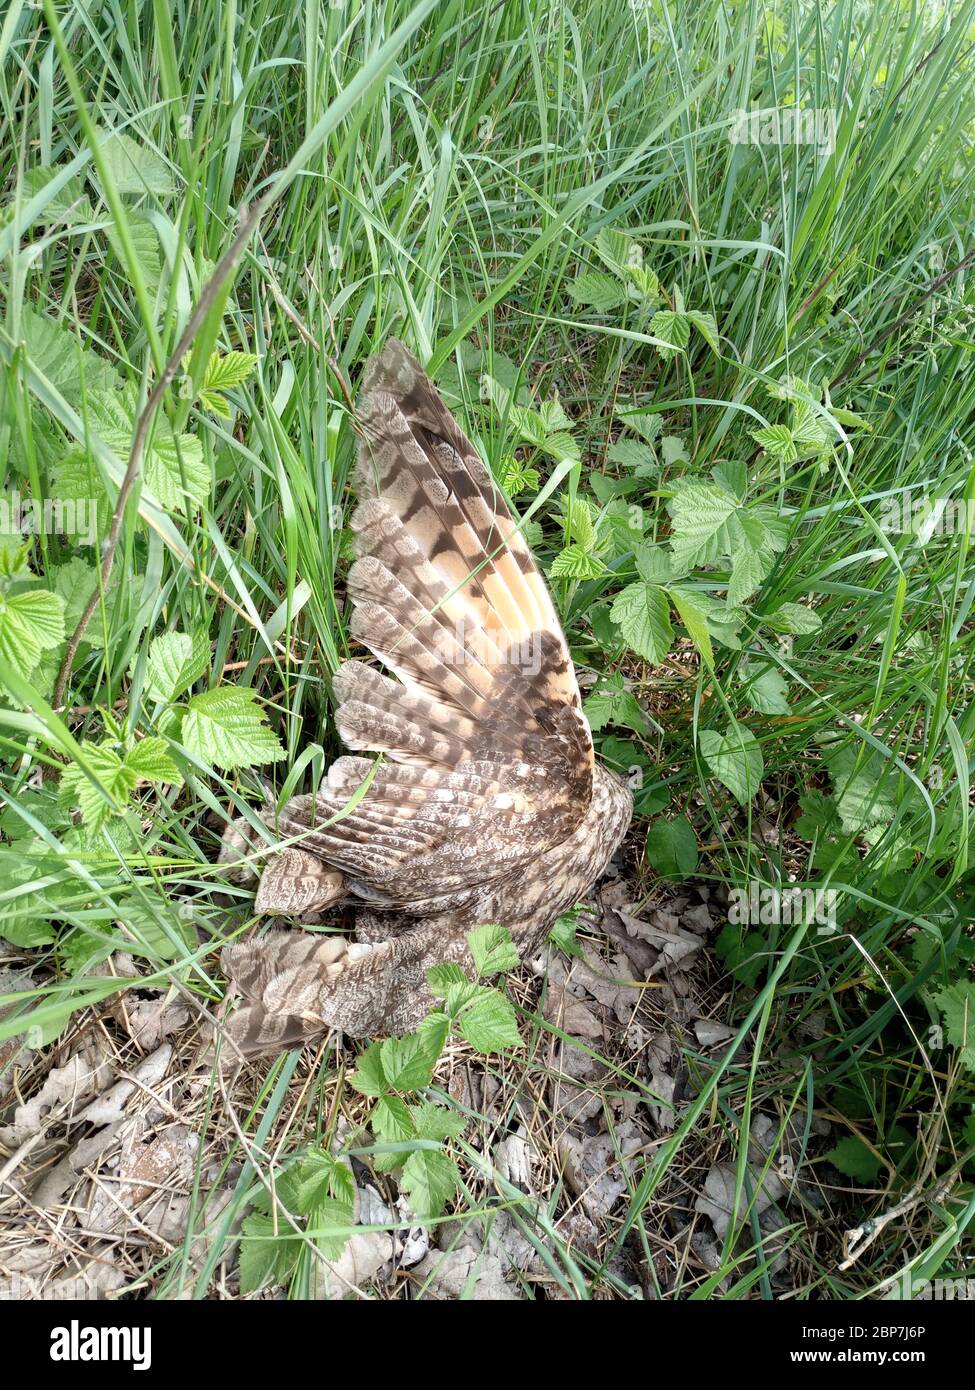 Dead owl. Found a dead owl in the grass. Stock Photo